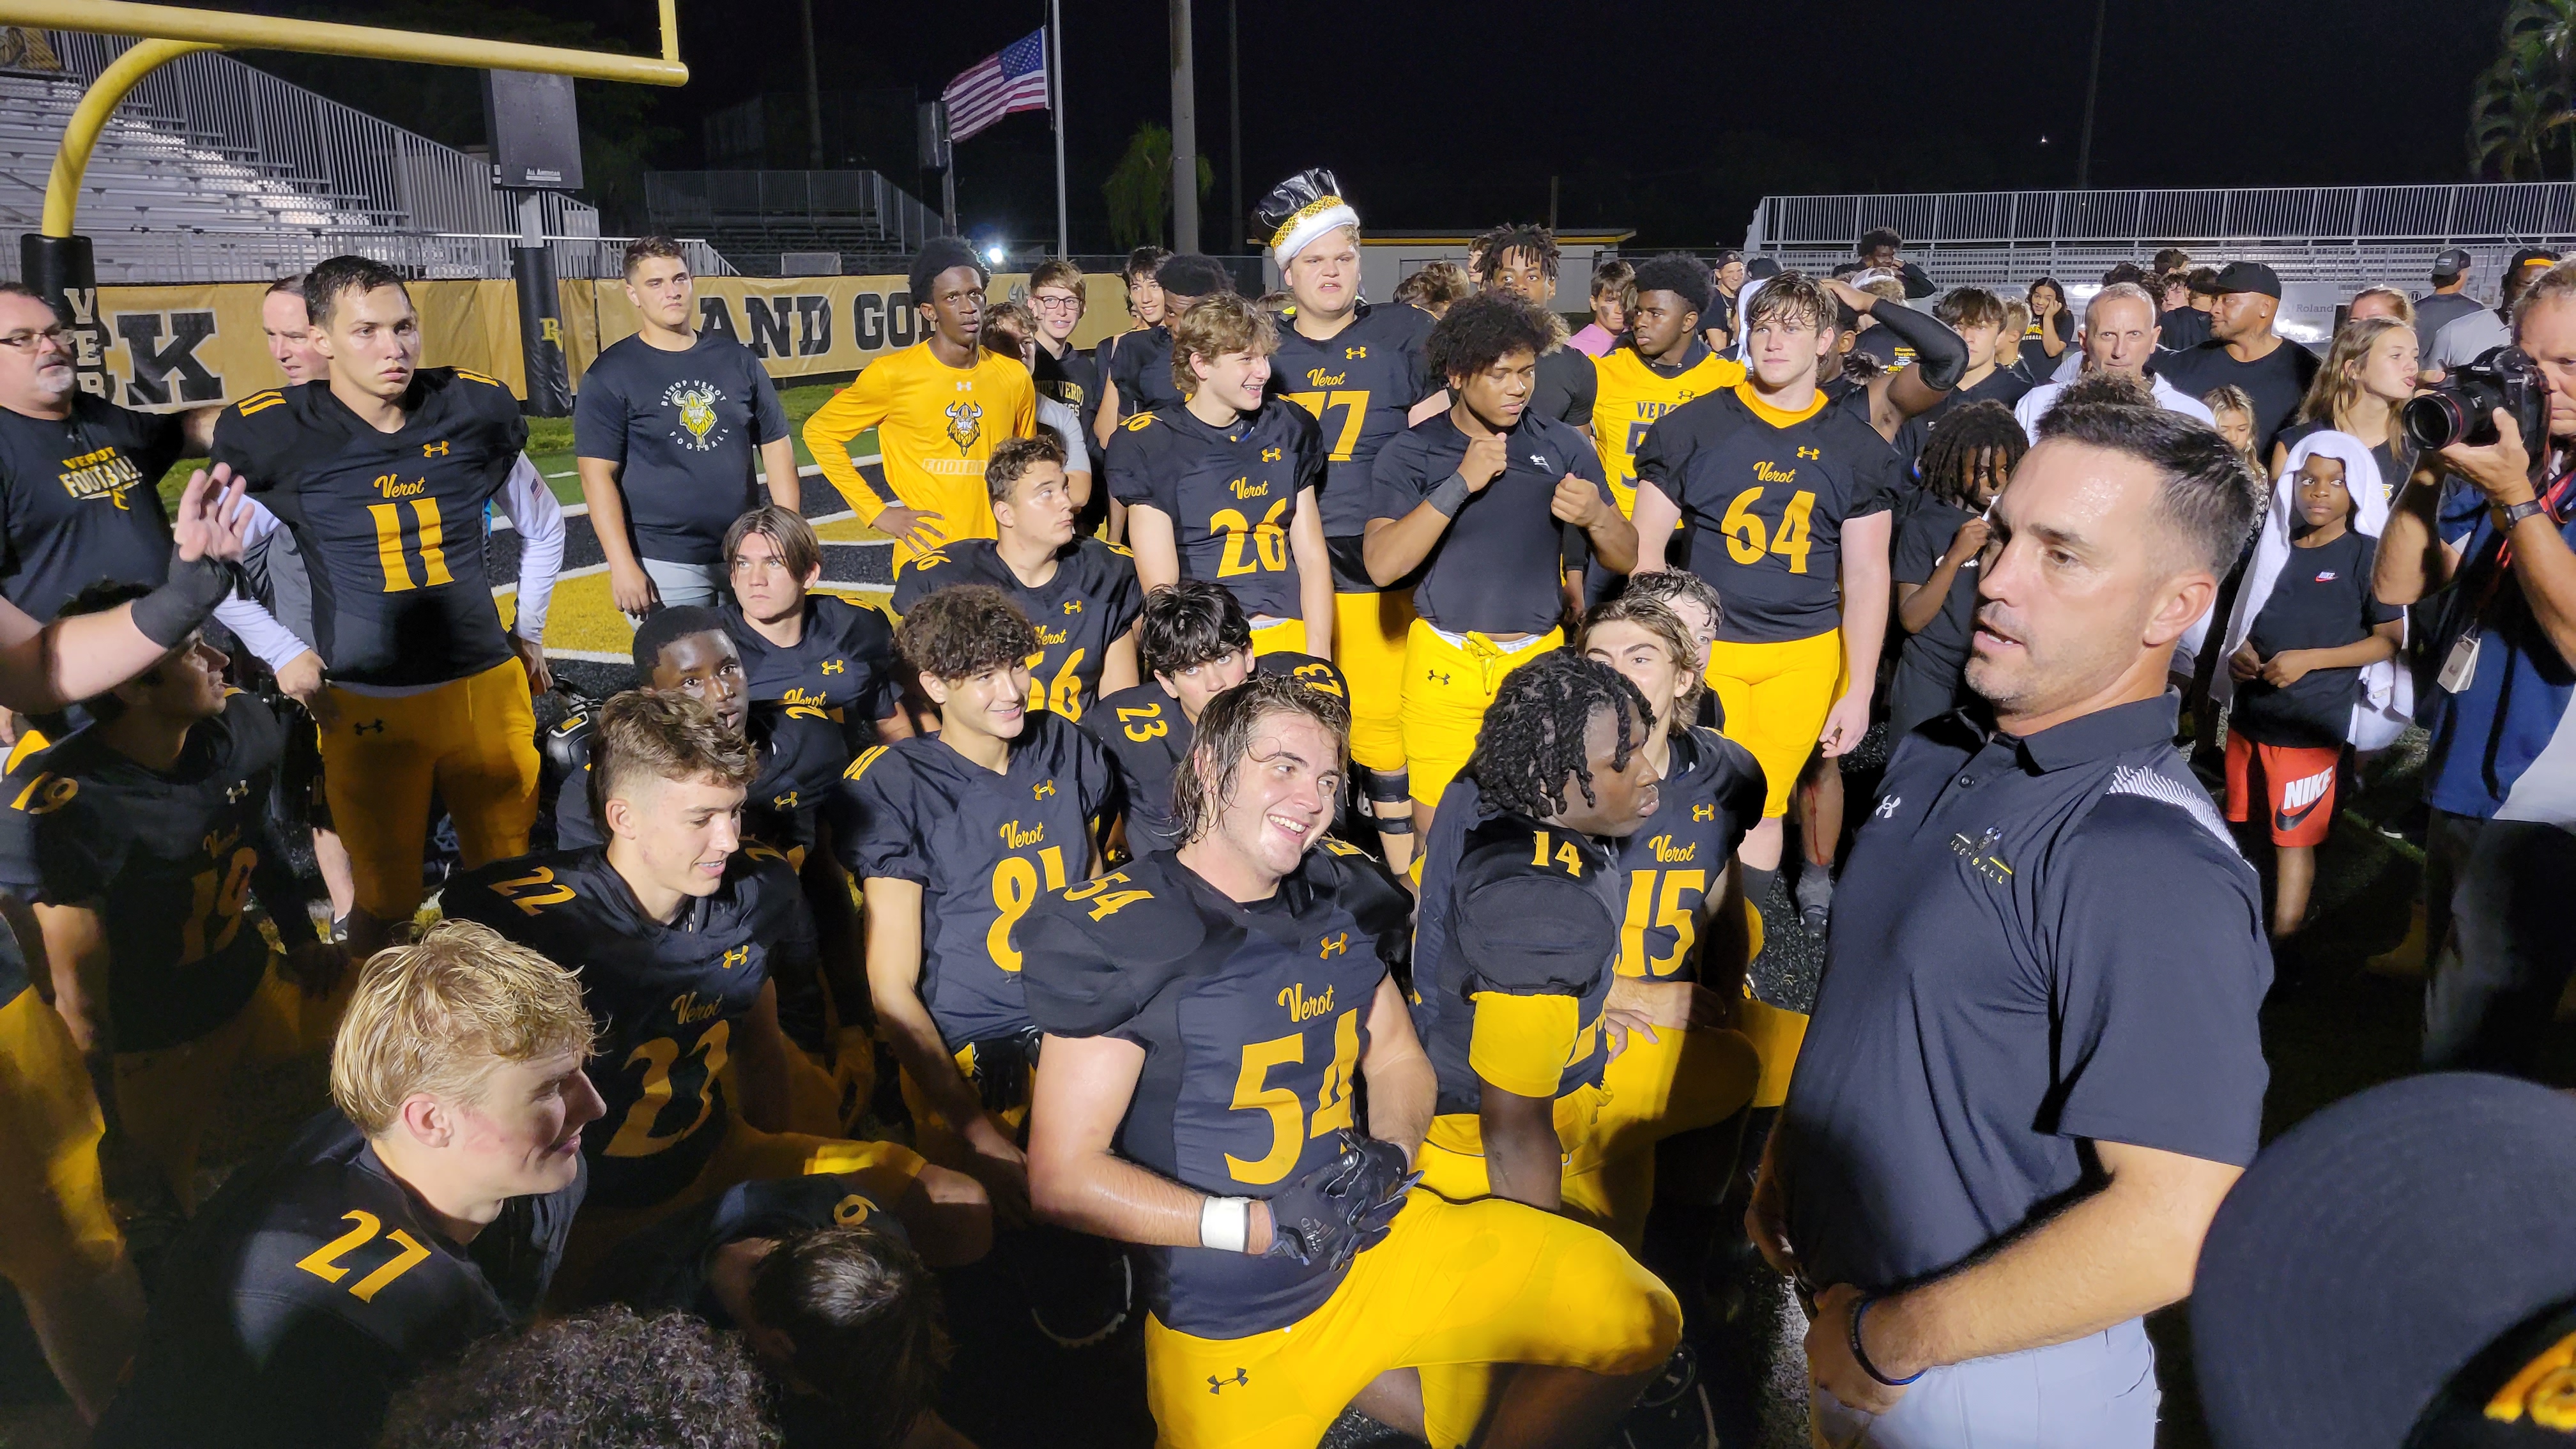 Head coach Richie Rode is preparing Bishop Verot squad for a six-hour road trip and playoff match-up with top-seeded and undefeated Florida University High in the Class 2S state semifinals this Friday.